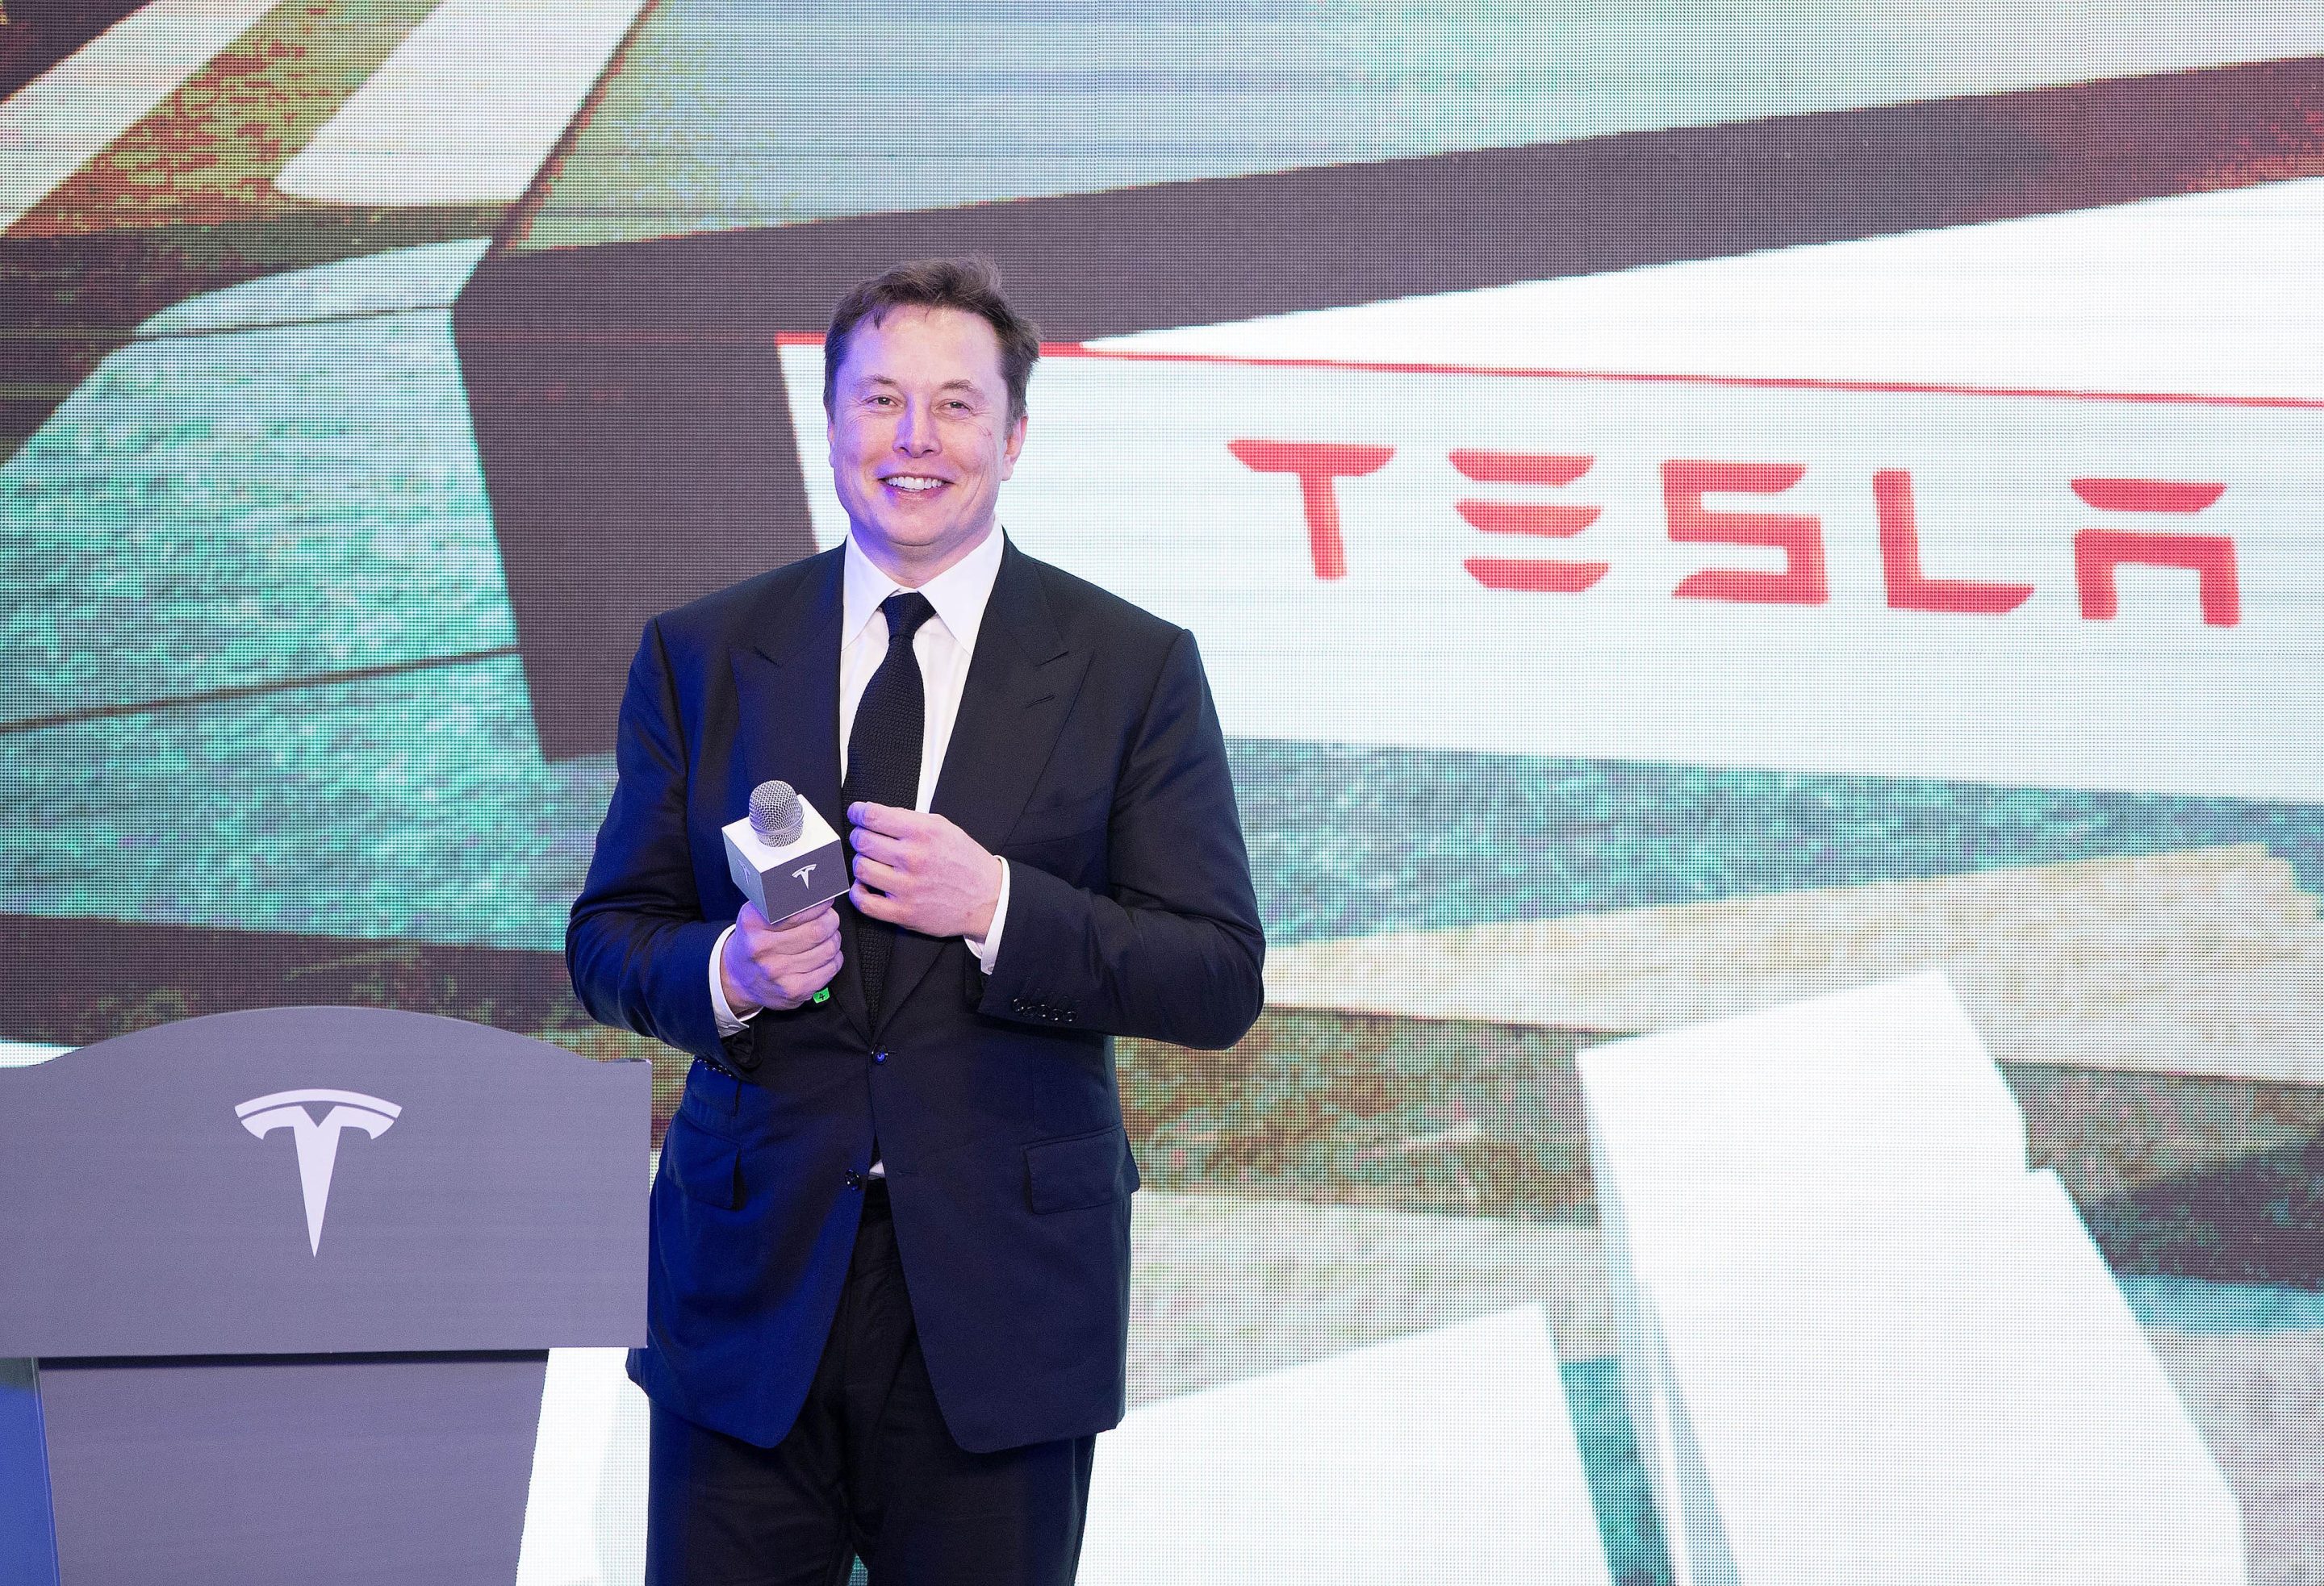 Elon Musk standing on stage